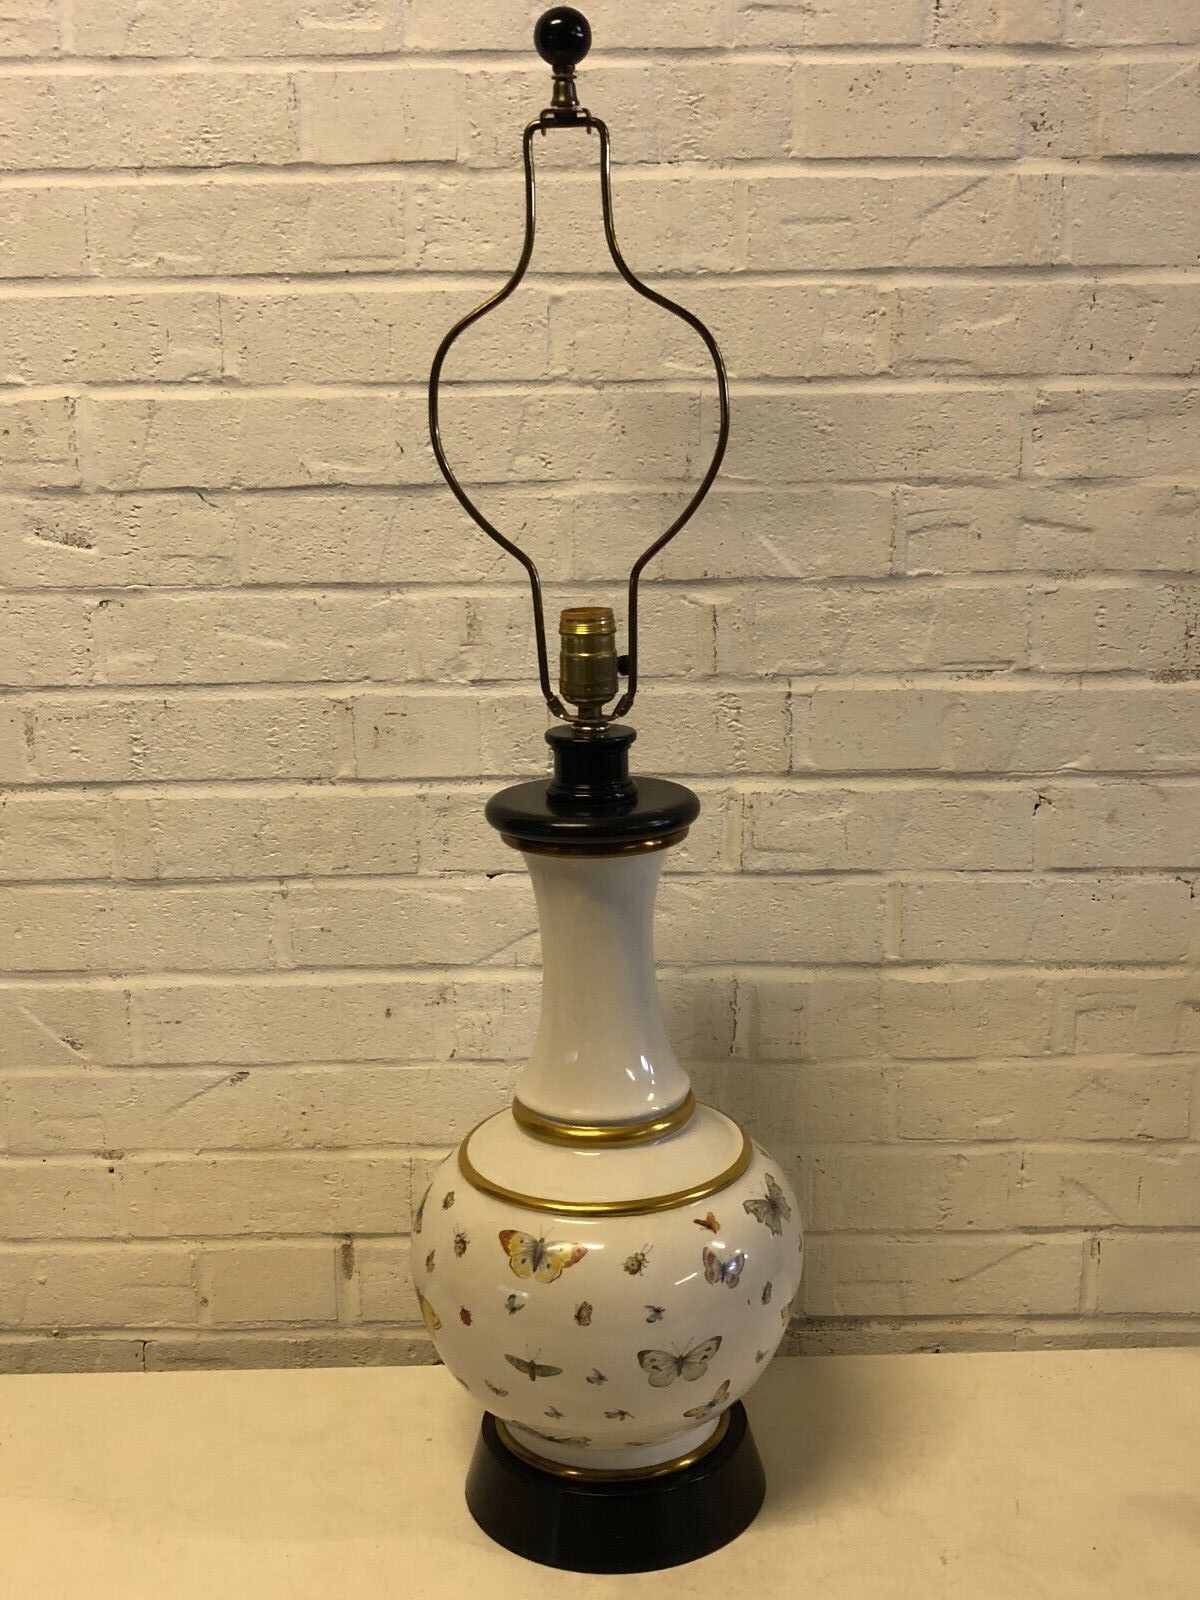 Vintage Possibly Antique Limoges Style Porcelain Lamp with Butterfly Decorations